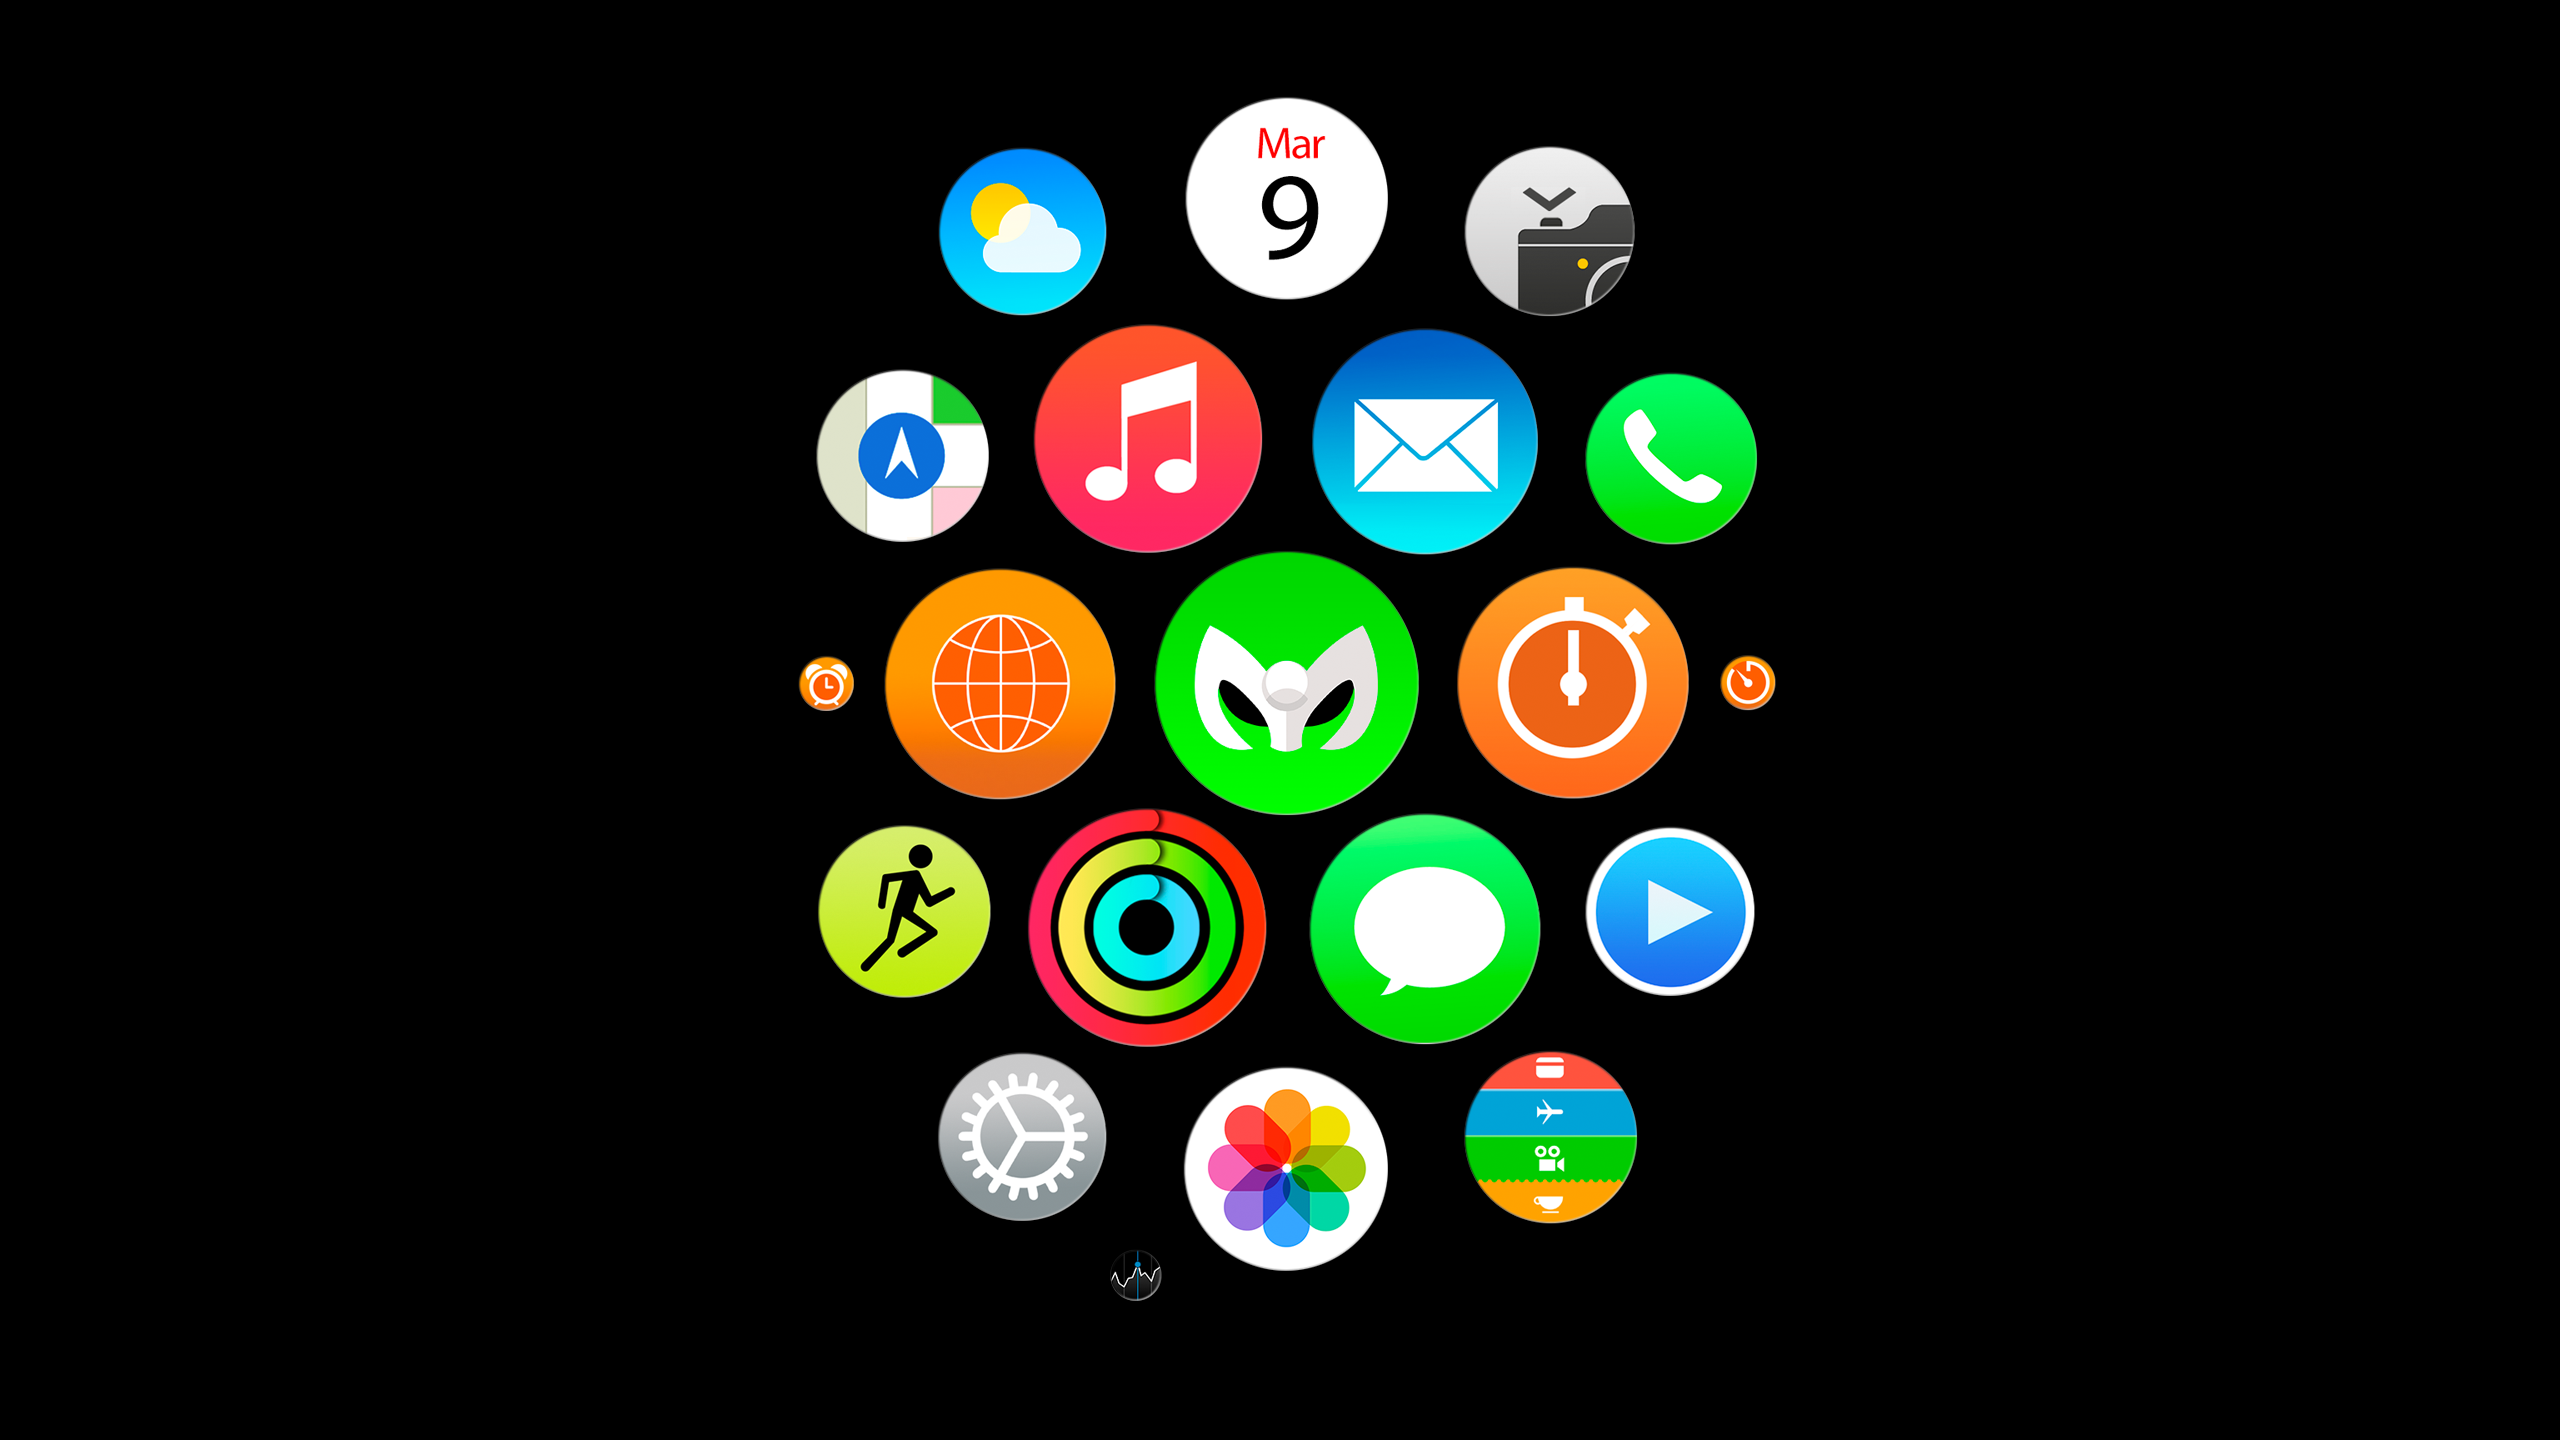 General 2560x1440 Apple Inc. colorful simple background black background technology minimalism